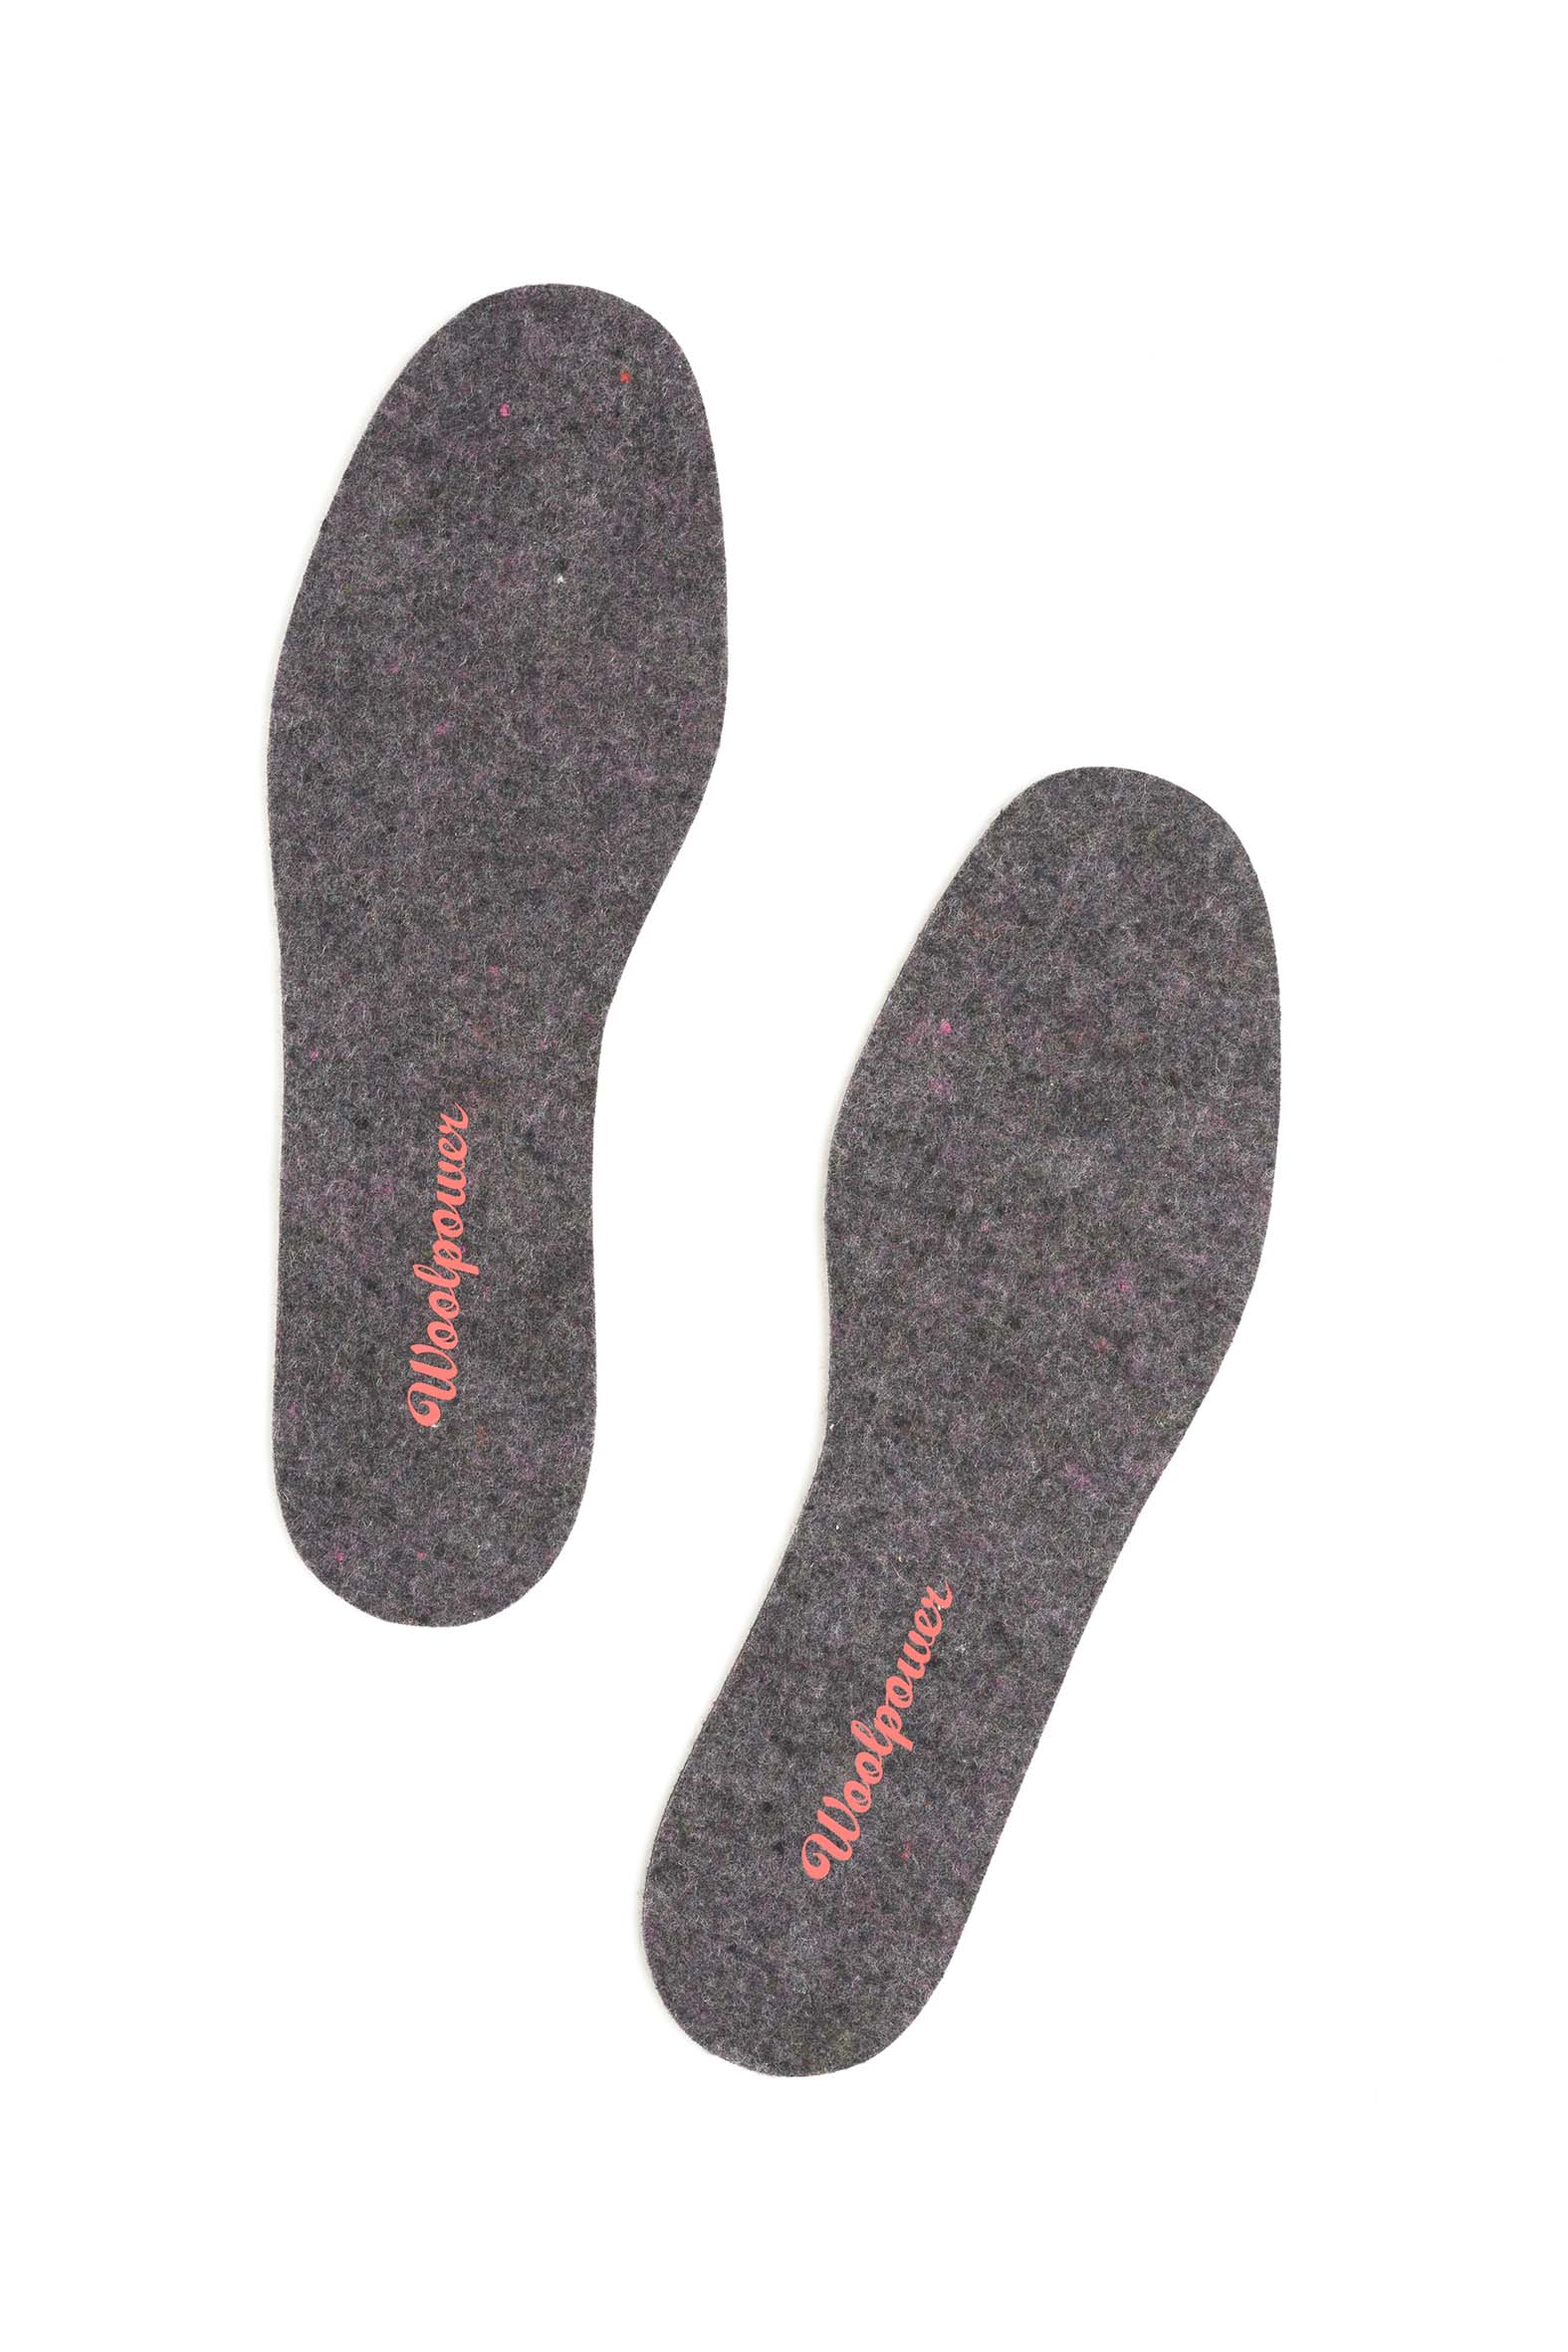 photo of Woolpower felt insoles in recycle grey colour